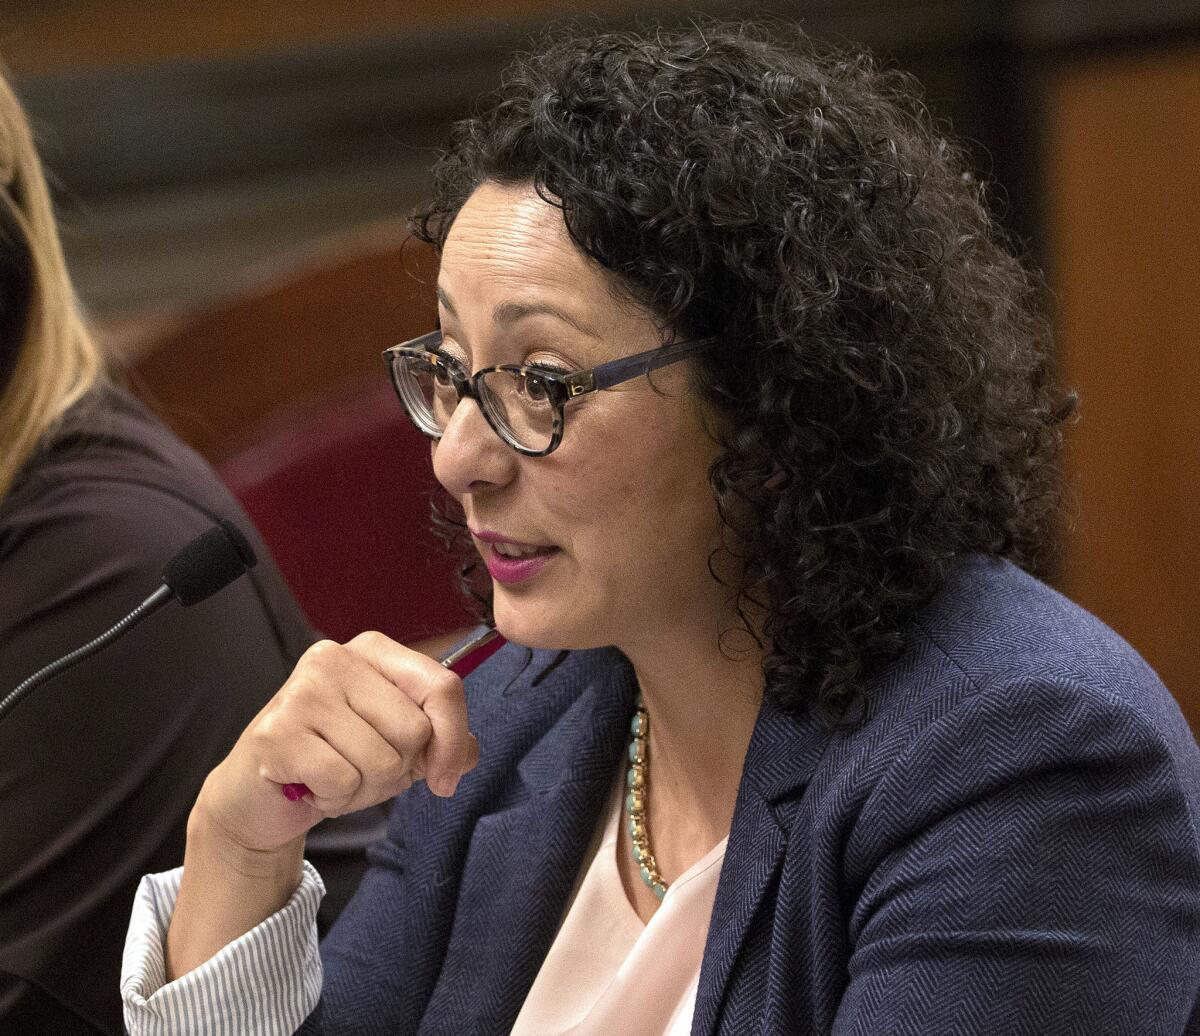 Assemblywoman Cristina Garcia (D-Bell Gardens) plans to introduce legislation that would give the California auditor the authority to examine the finances of government lobbying organizations.